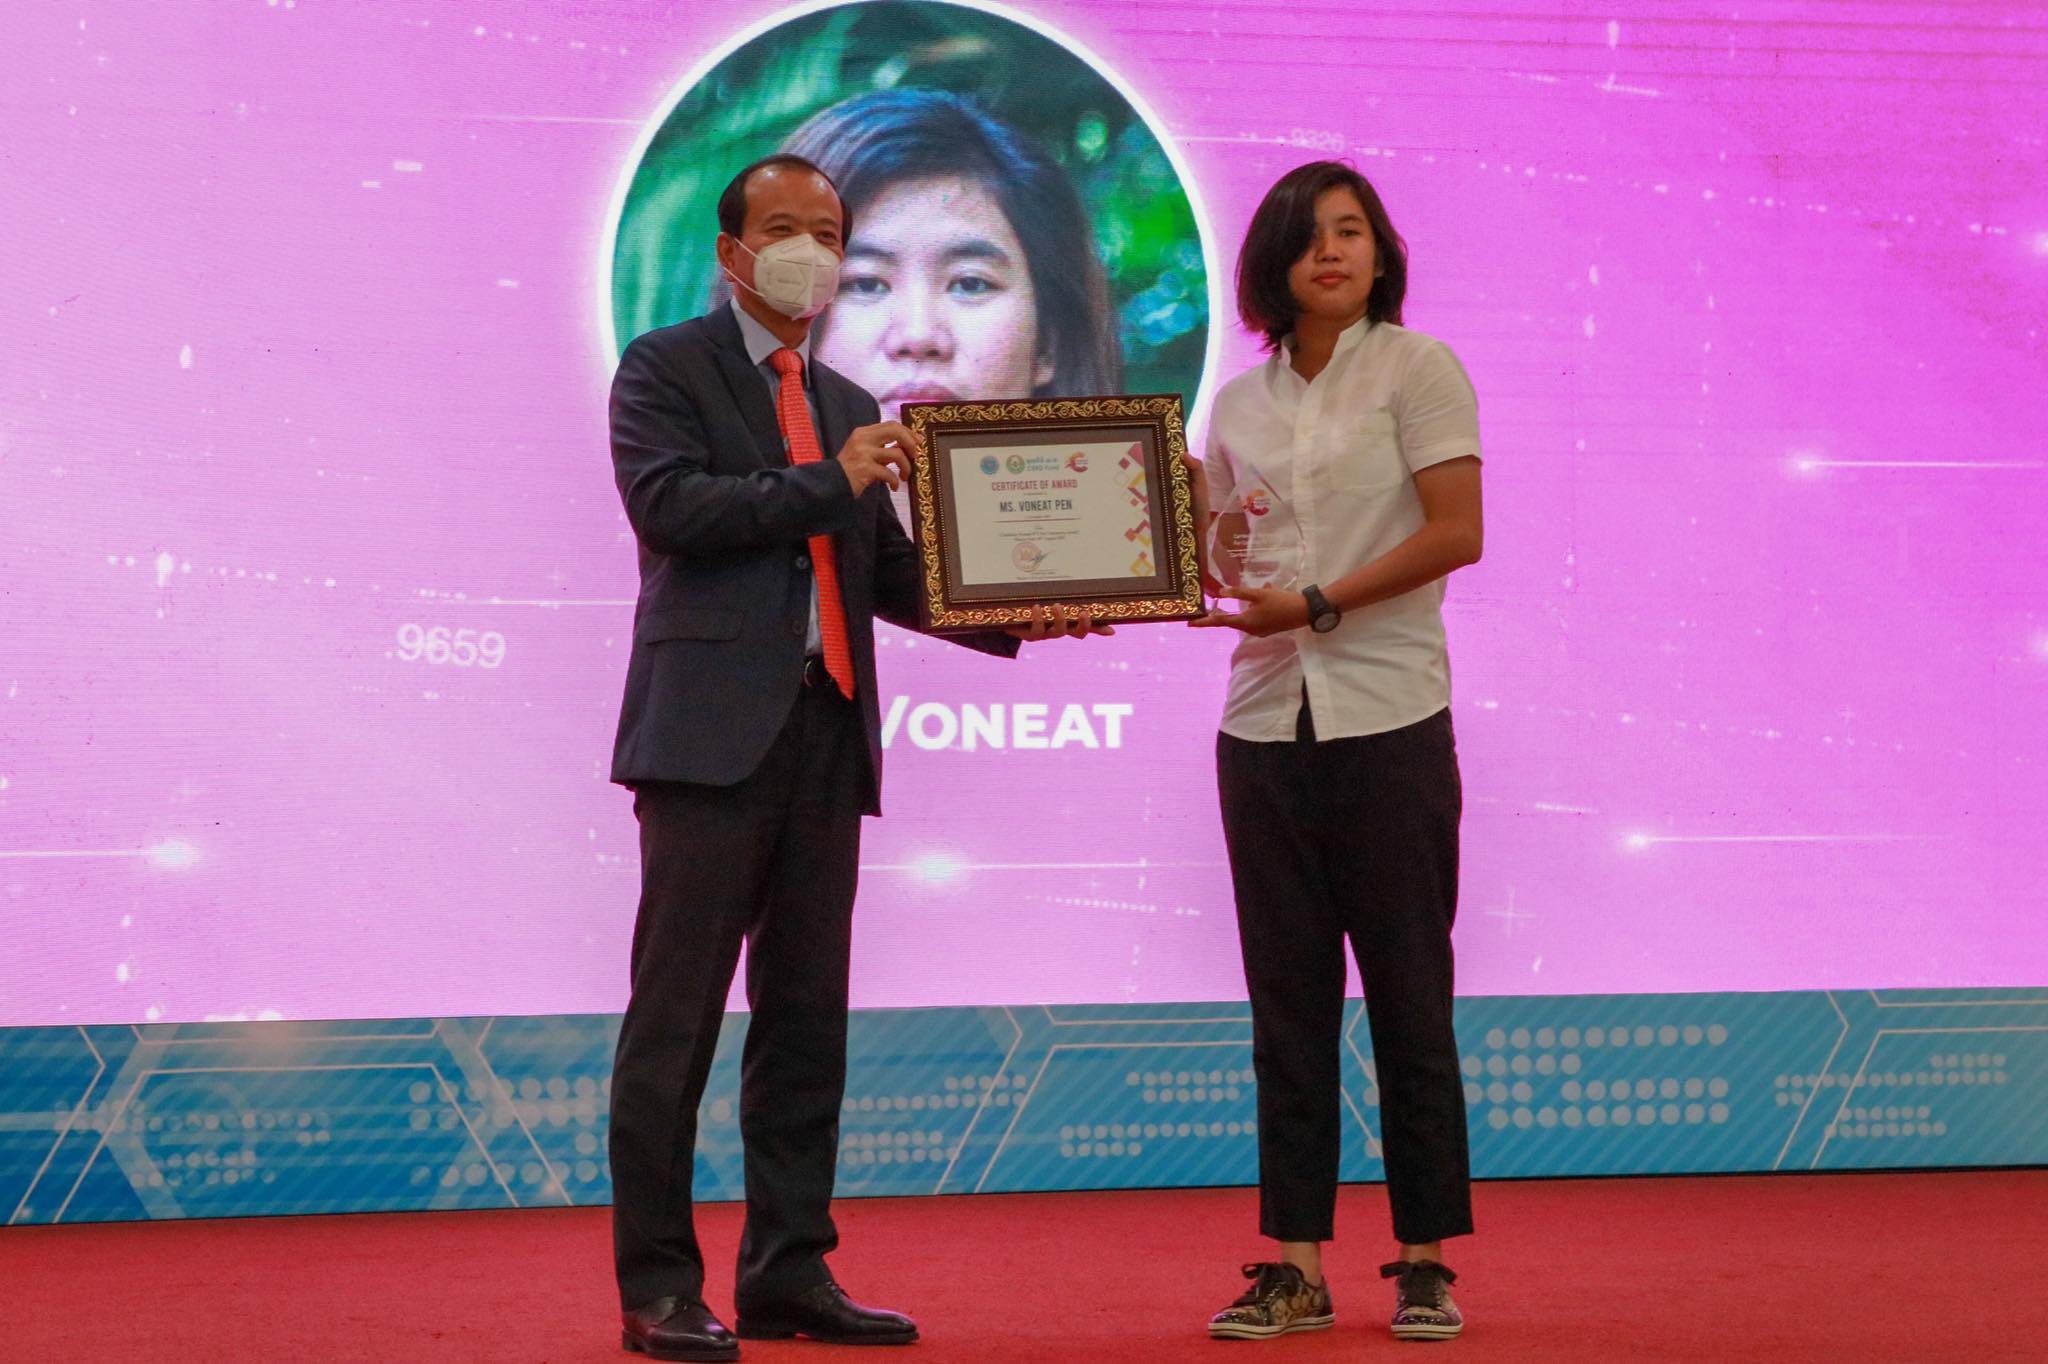 Cambodia Woman ICT For Community Award), Miss Pen Vannet